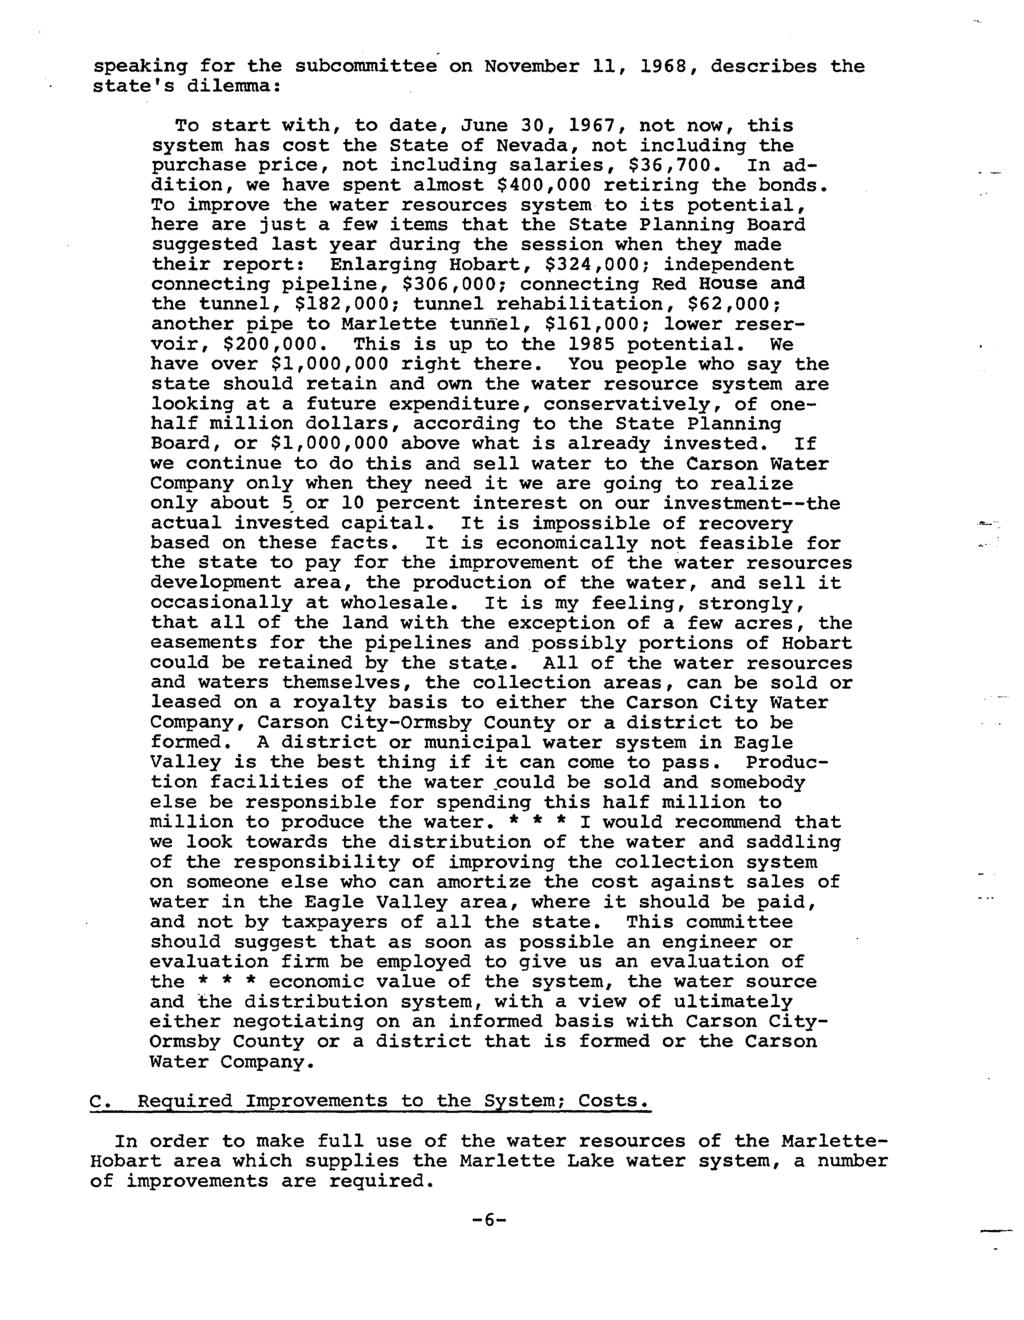 speaking for the subcommittee on November 11, 1968, describes the state's dilemma: To start with, to date, June 30, 1967, not now, this system has cost the State of Nevada, not including the purchase